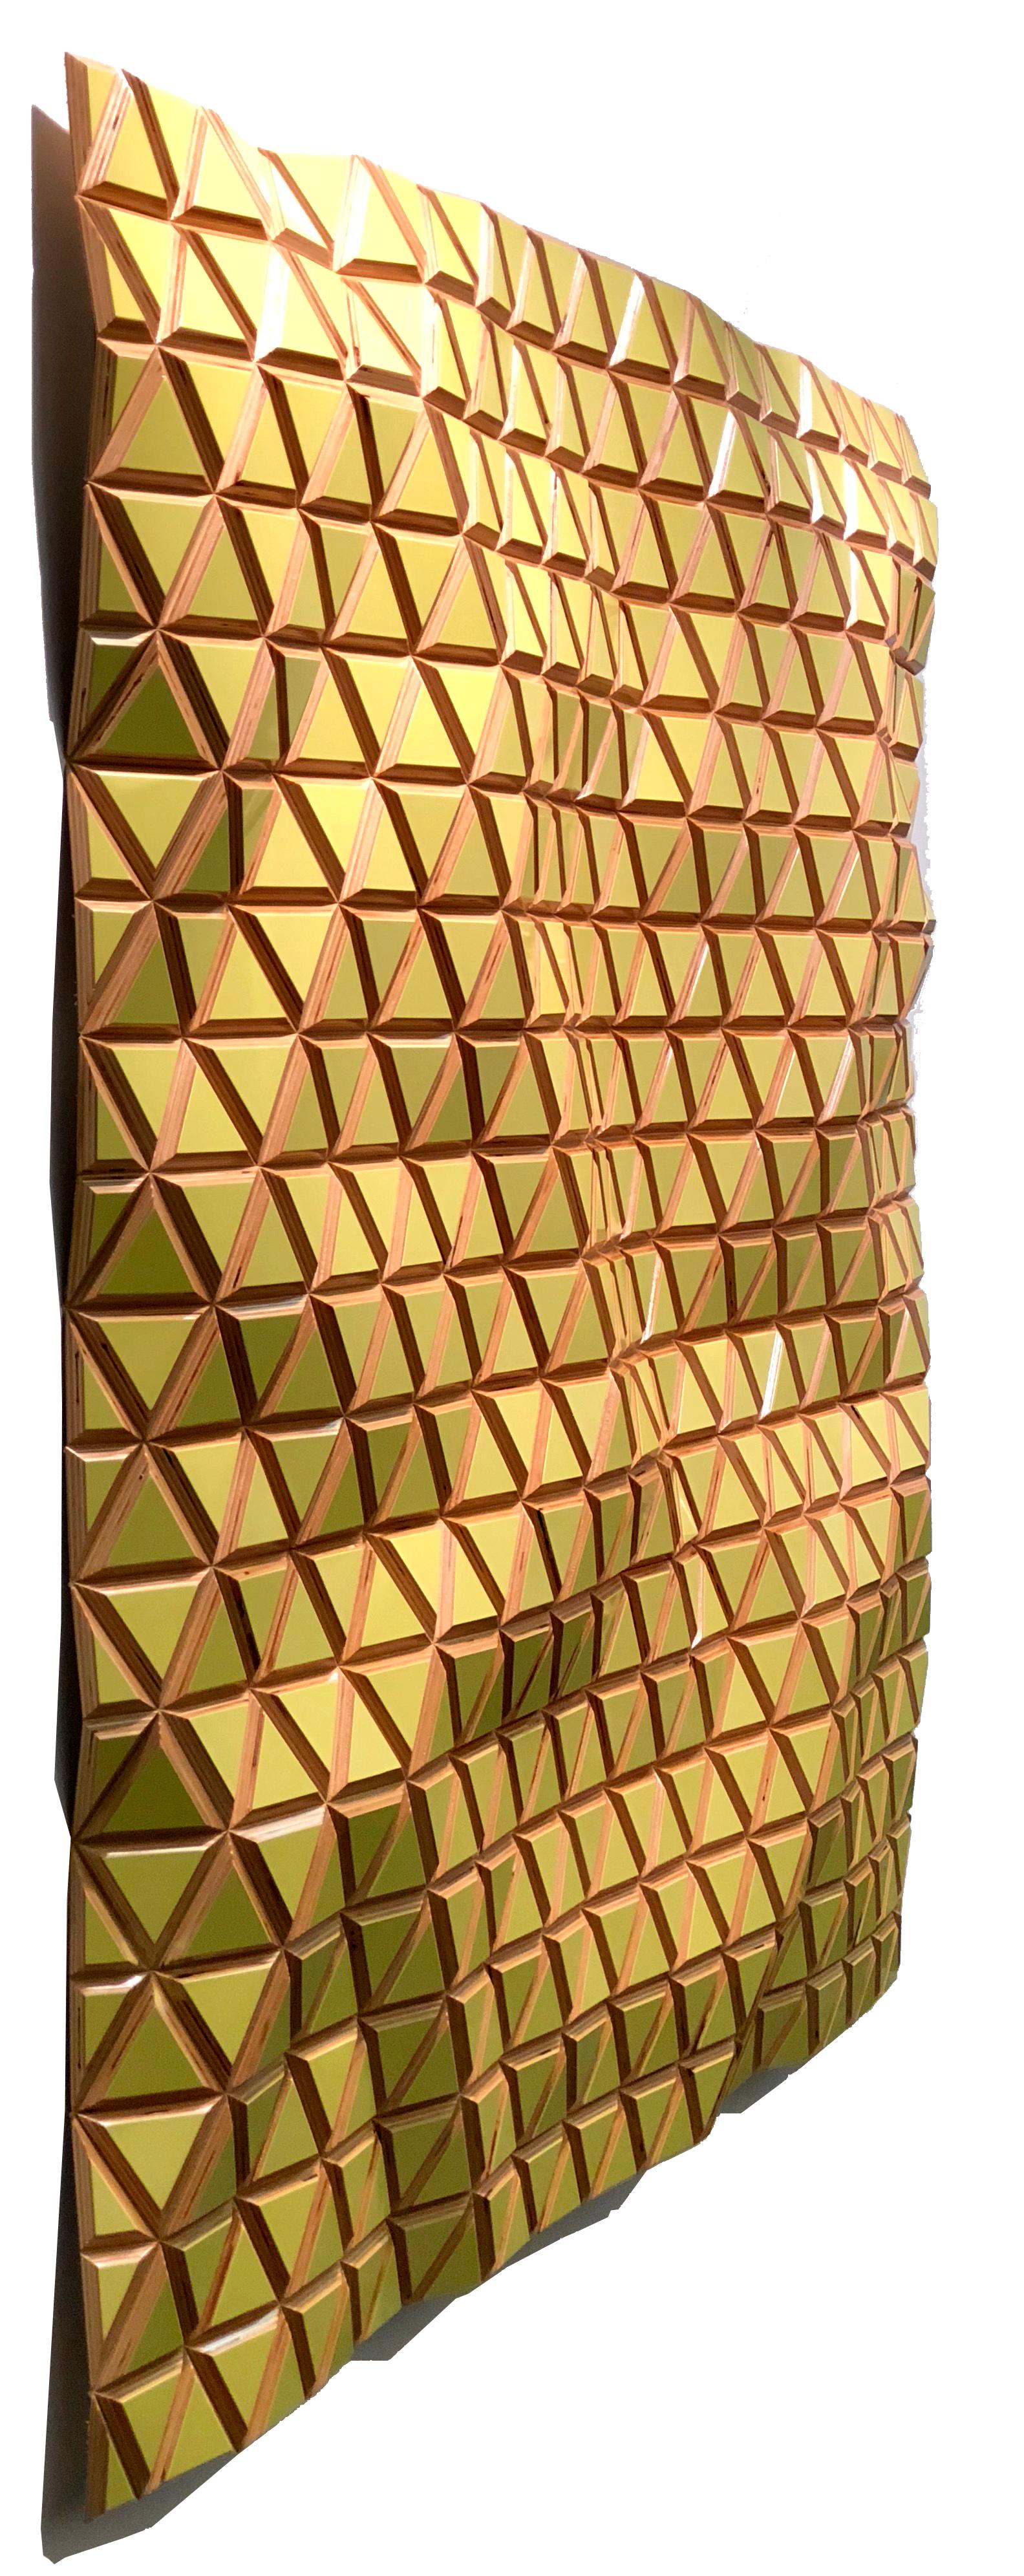 Honeycomb Conjecture, painted carved wood sculptural wall, parametric design - Sculpture by Hugo Garcia-Urrutia